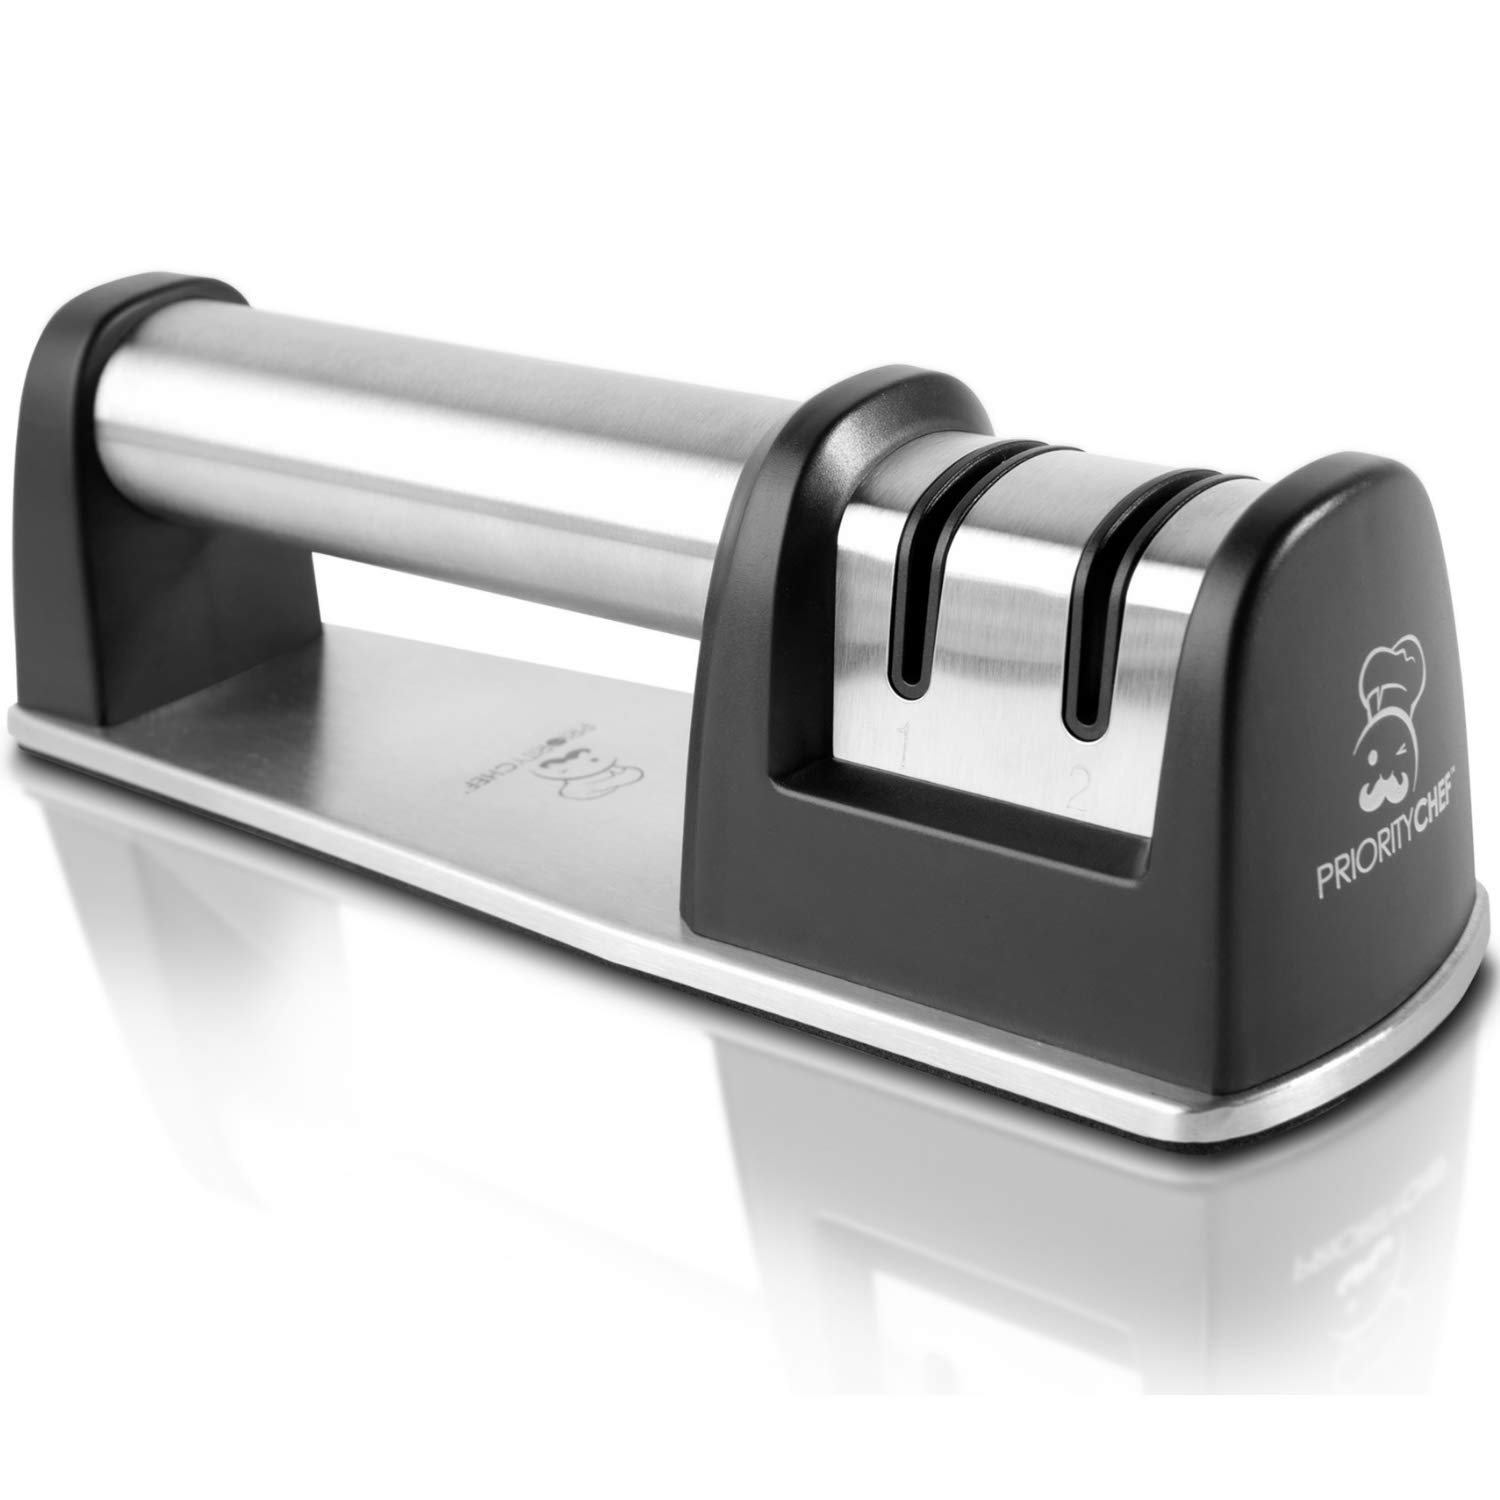 PriorityChef Stainless Steel Professional Knife Sharpener